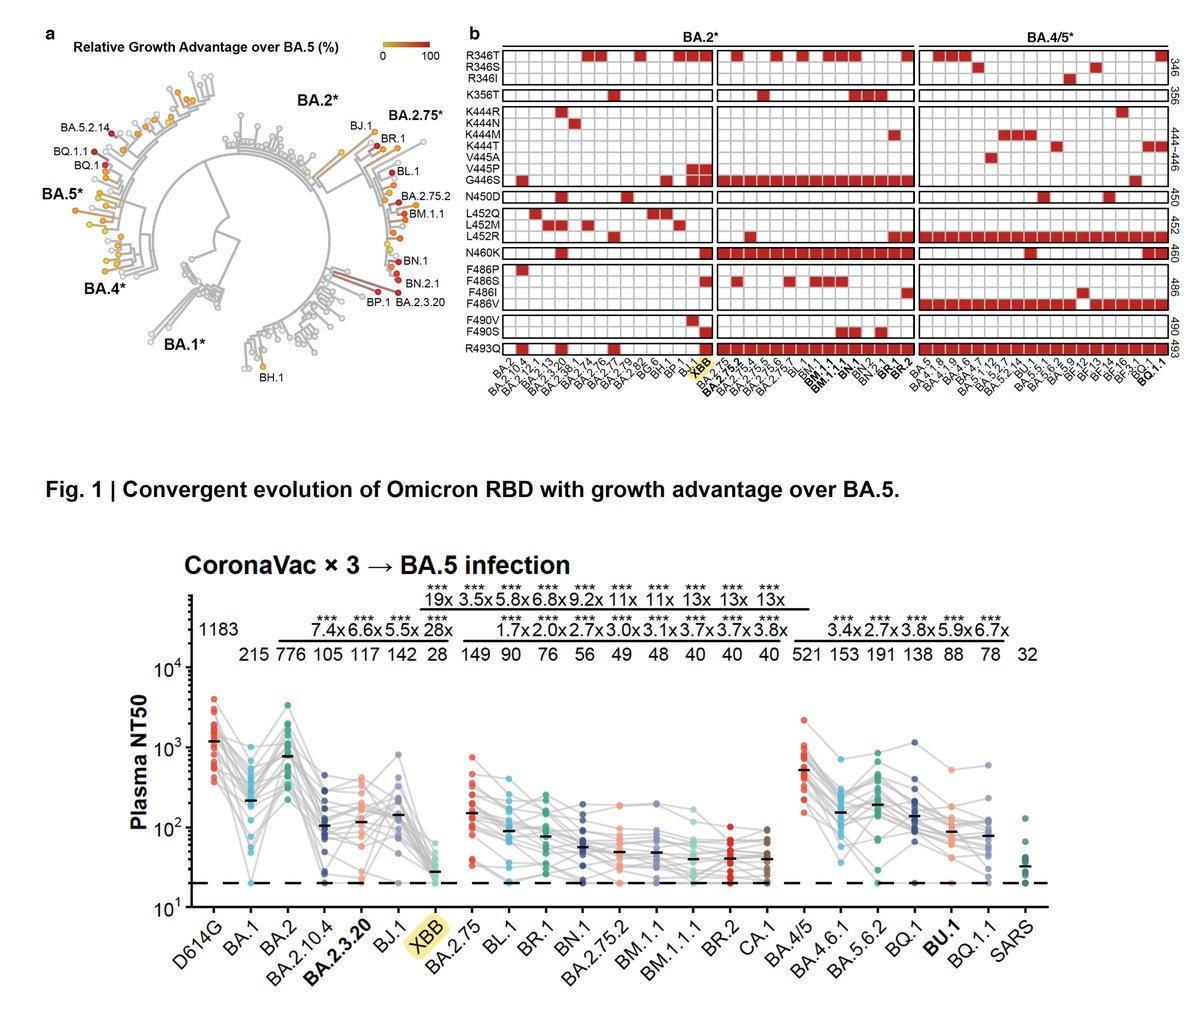 A couple of weeks ago BA.2.75.2 was shown to be the most immune evasive variant seen to date and replicated. That's now been surpassed by XBB, which is predicted here may challenge BA.5 bivalent vaccine protection biorxiv.org/content/10.110… by @yunlong_cao and colleagues